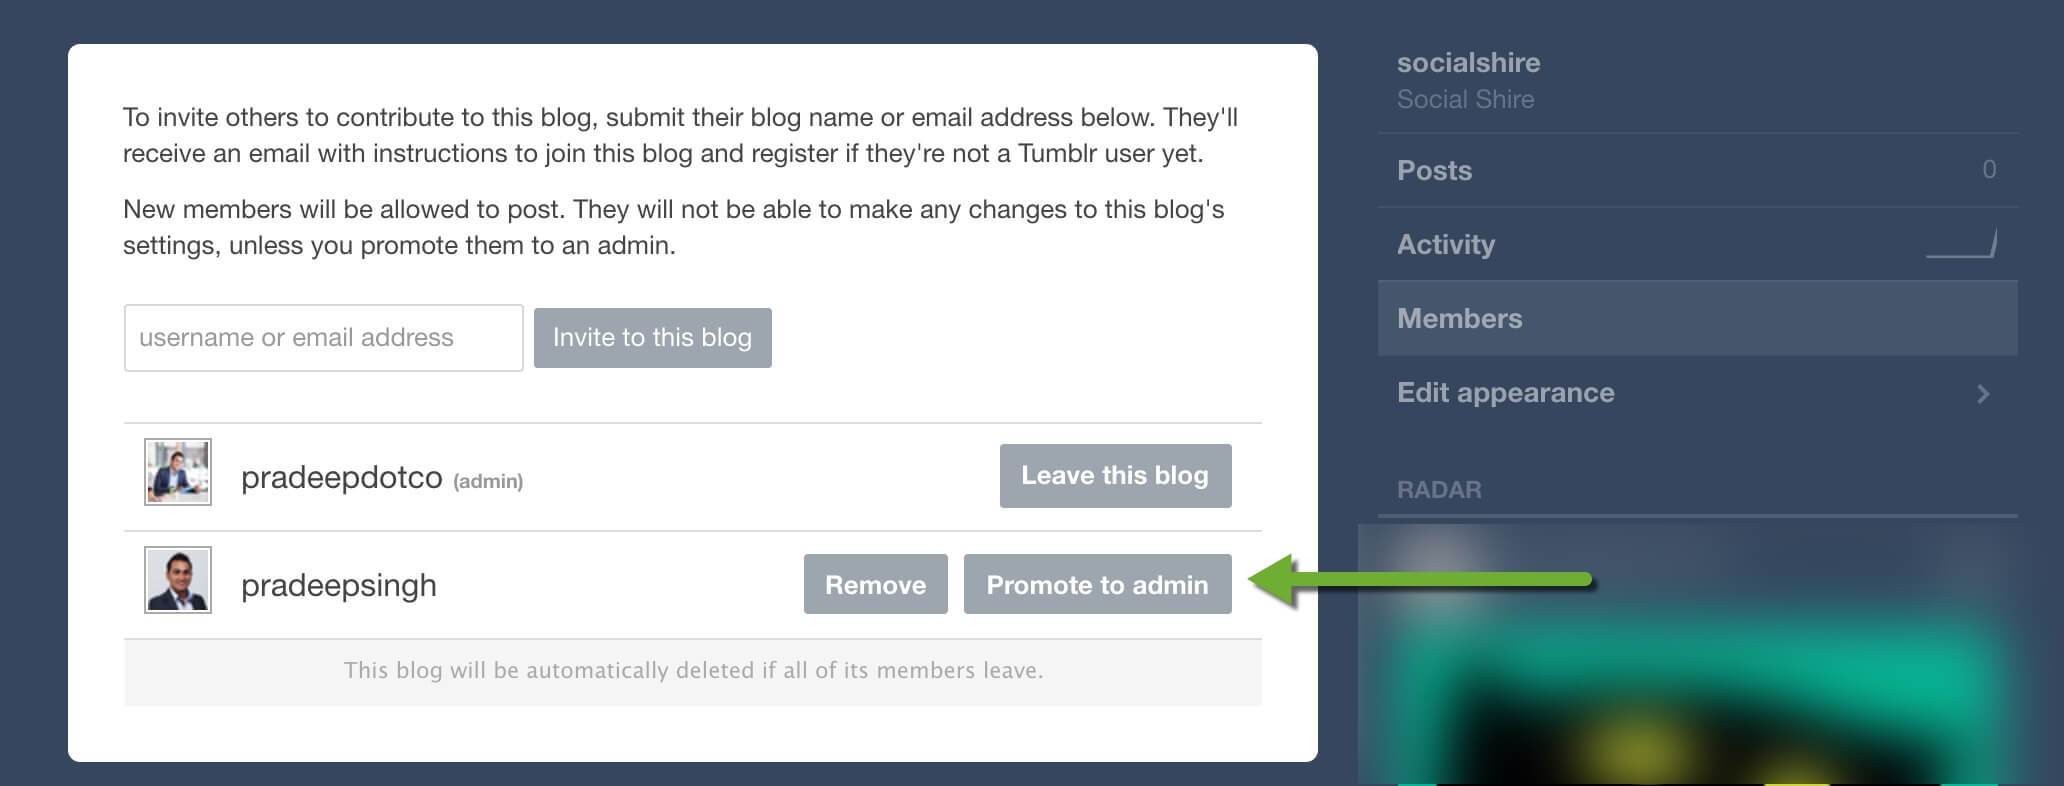 Promote New tumblr account to Admin